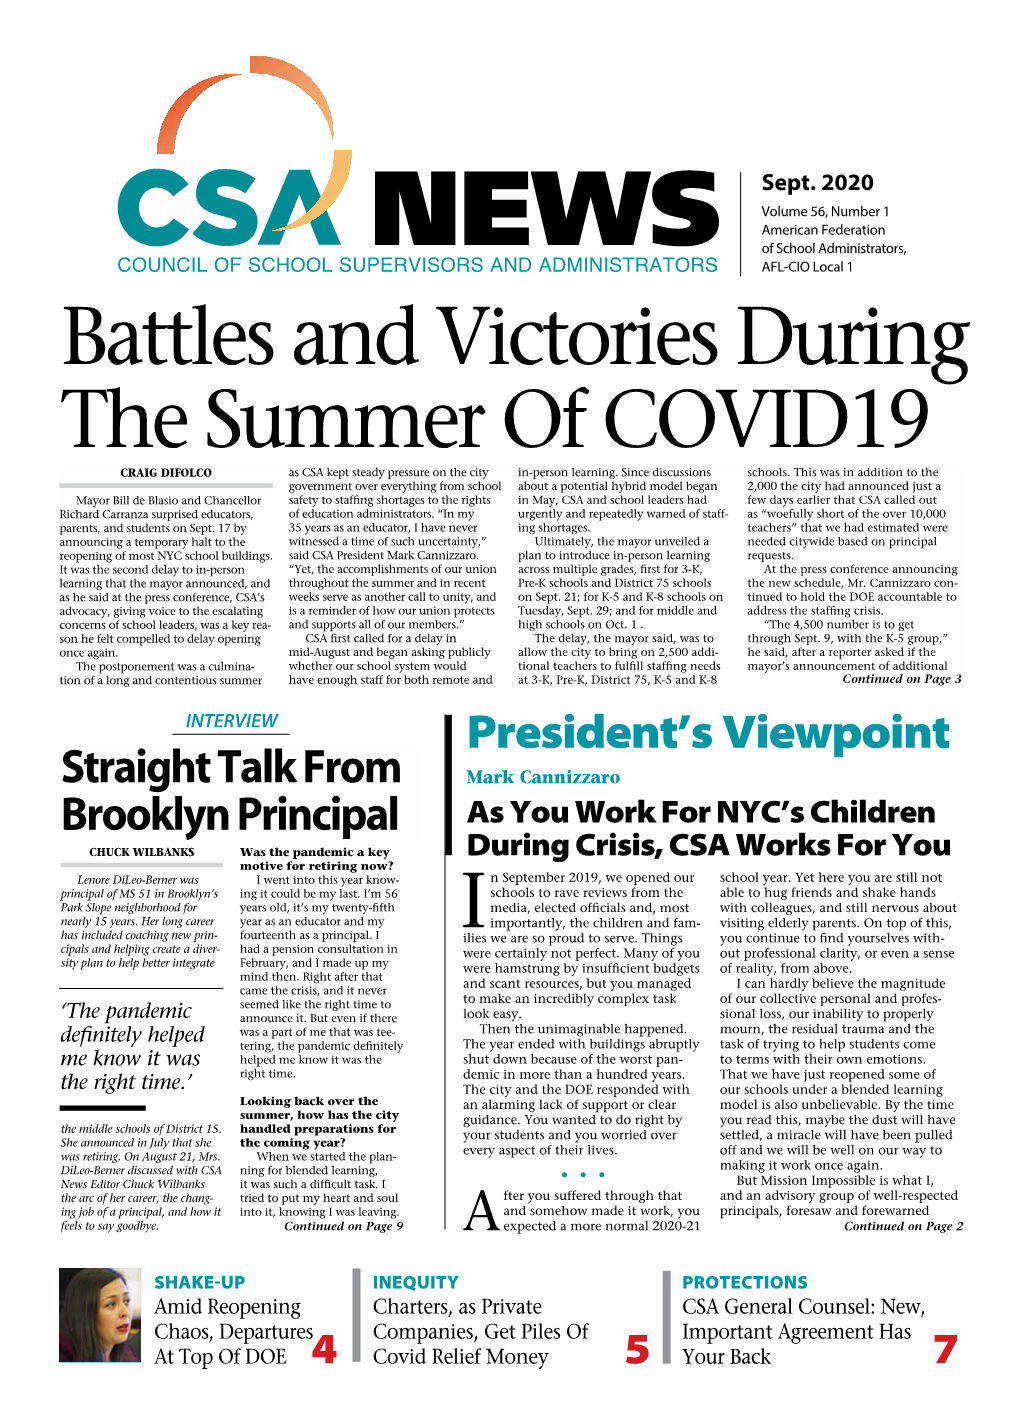 Battles and Victories During the Summer of COVID19 CRAIG DIFOLCO As CSA Kept Steady Pressure on the City In-Person Learning